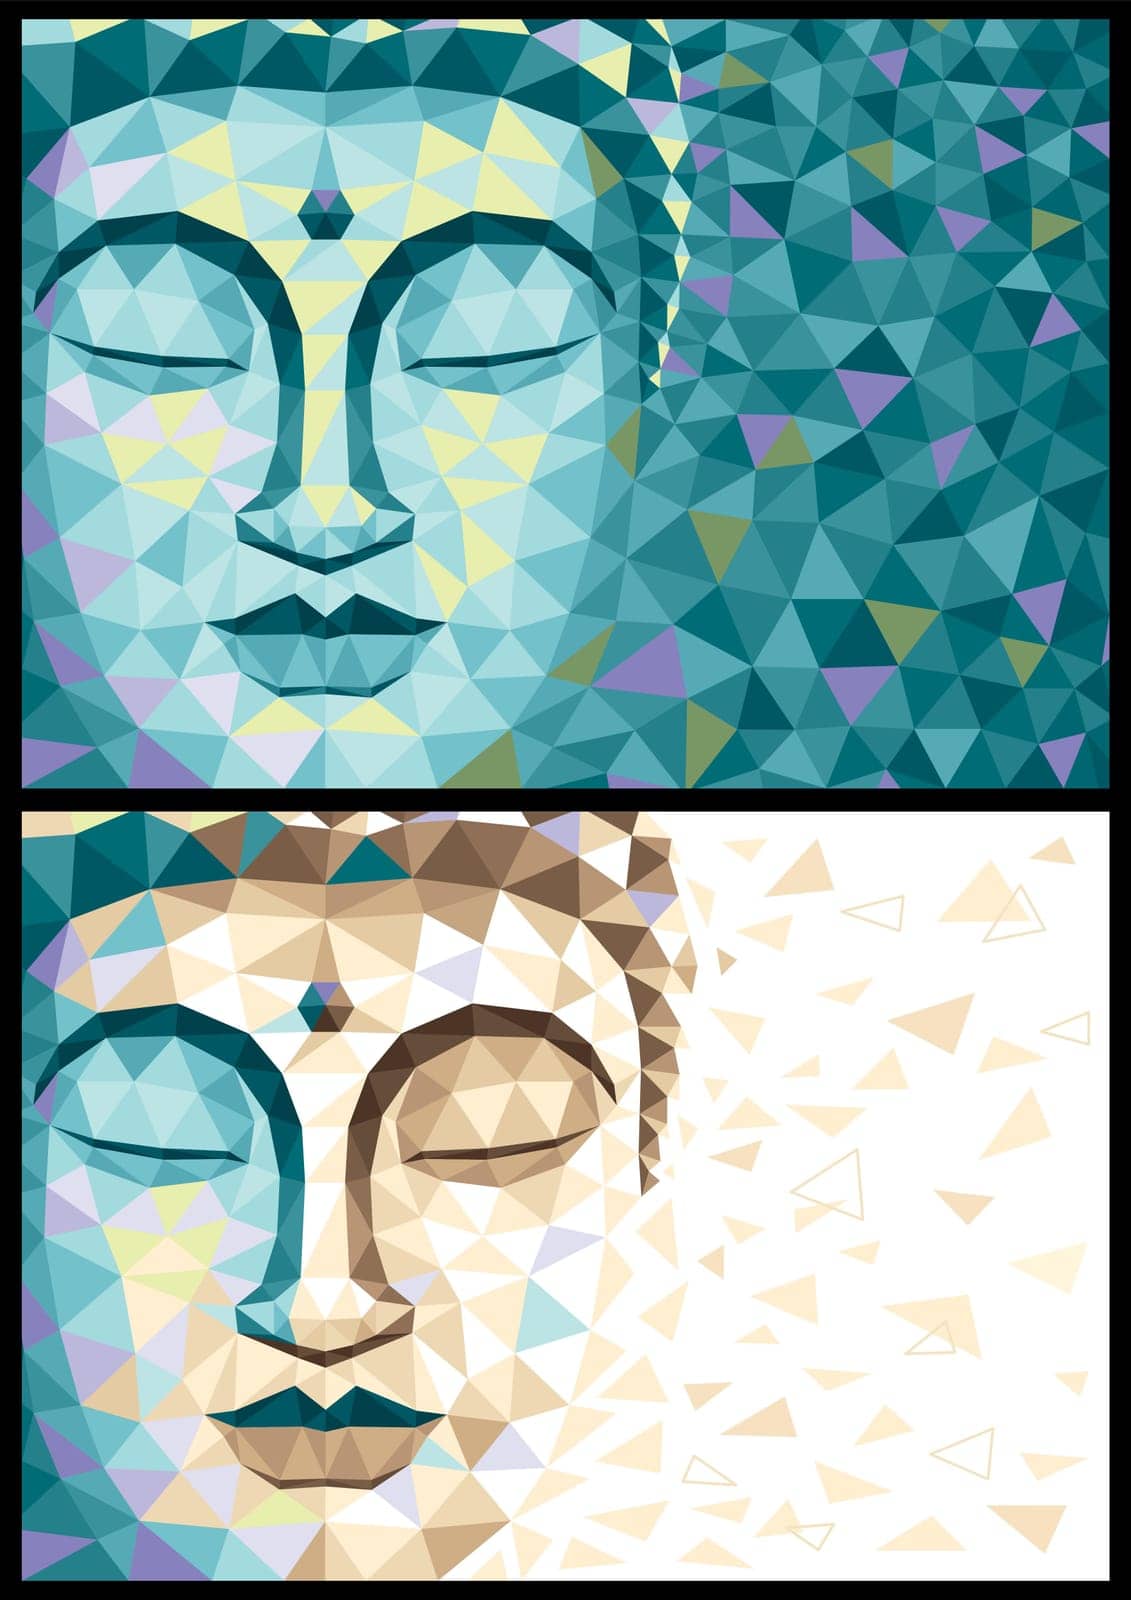 Abstract illustration of Buddha in 2 versions. No transparency and gradients used.